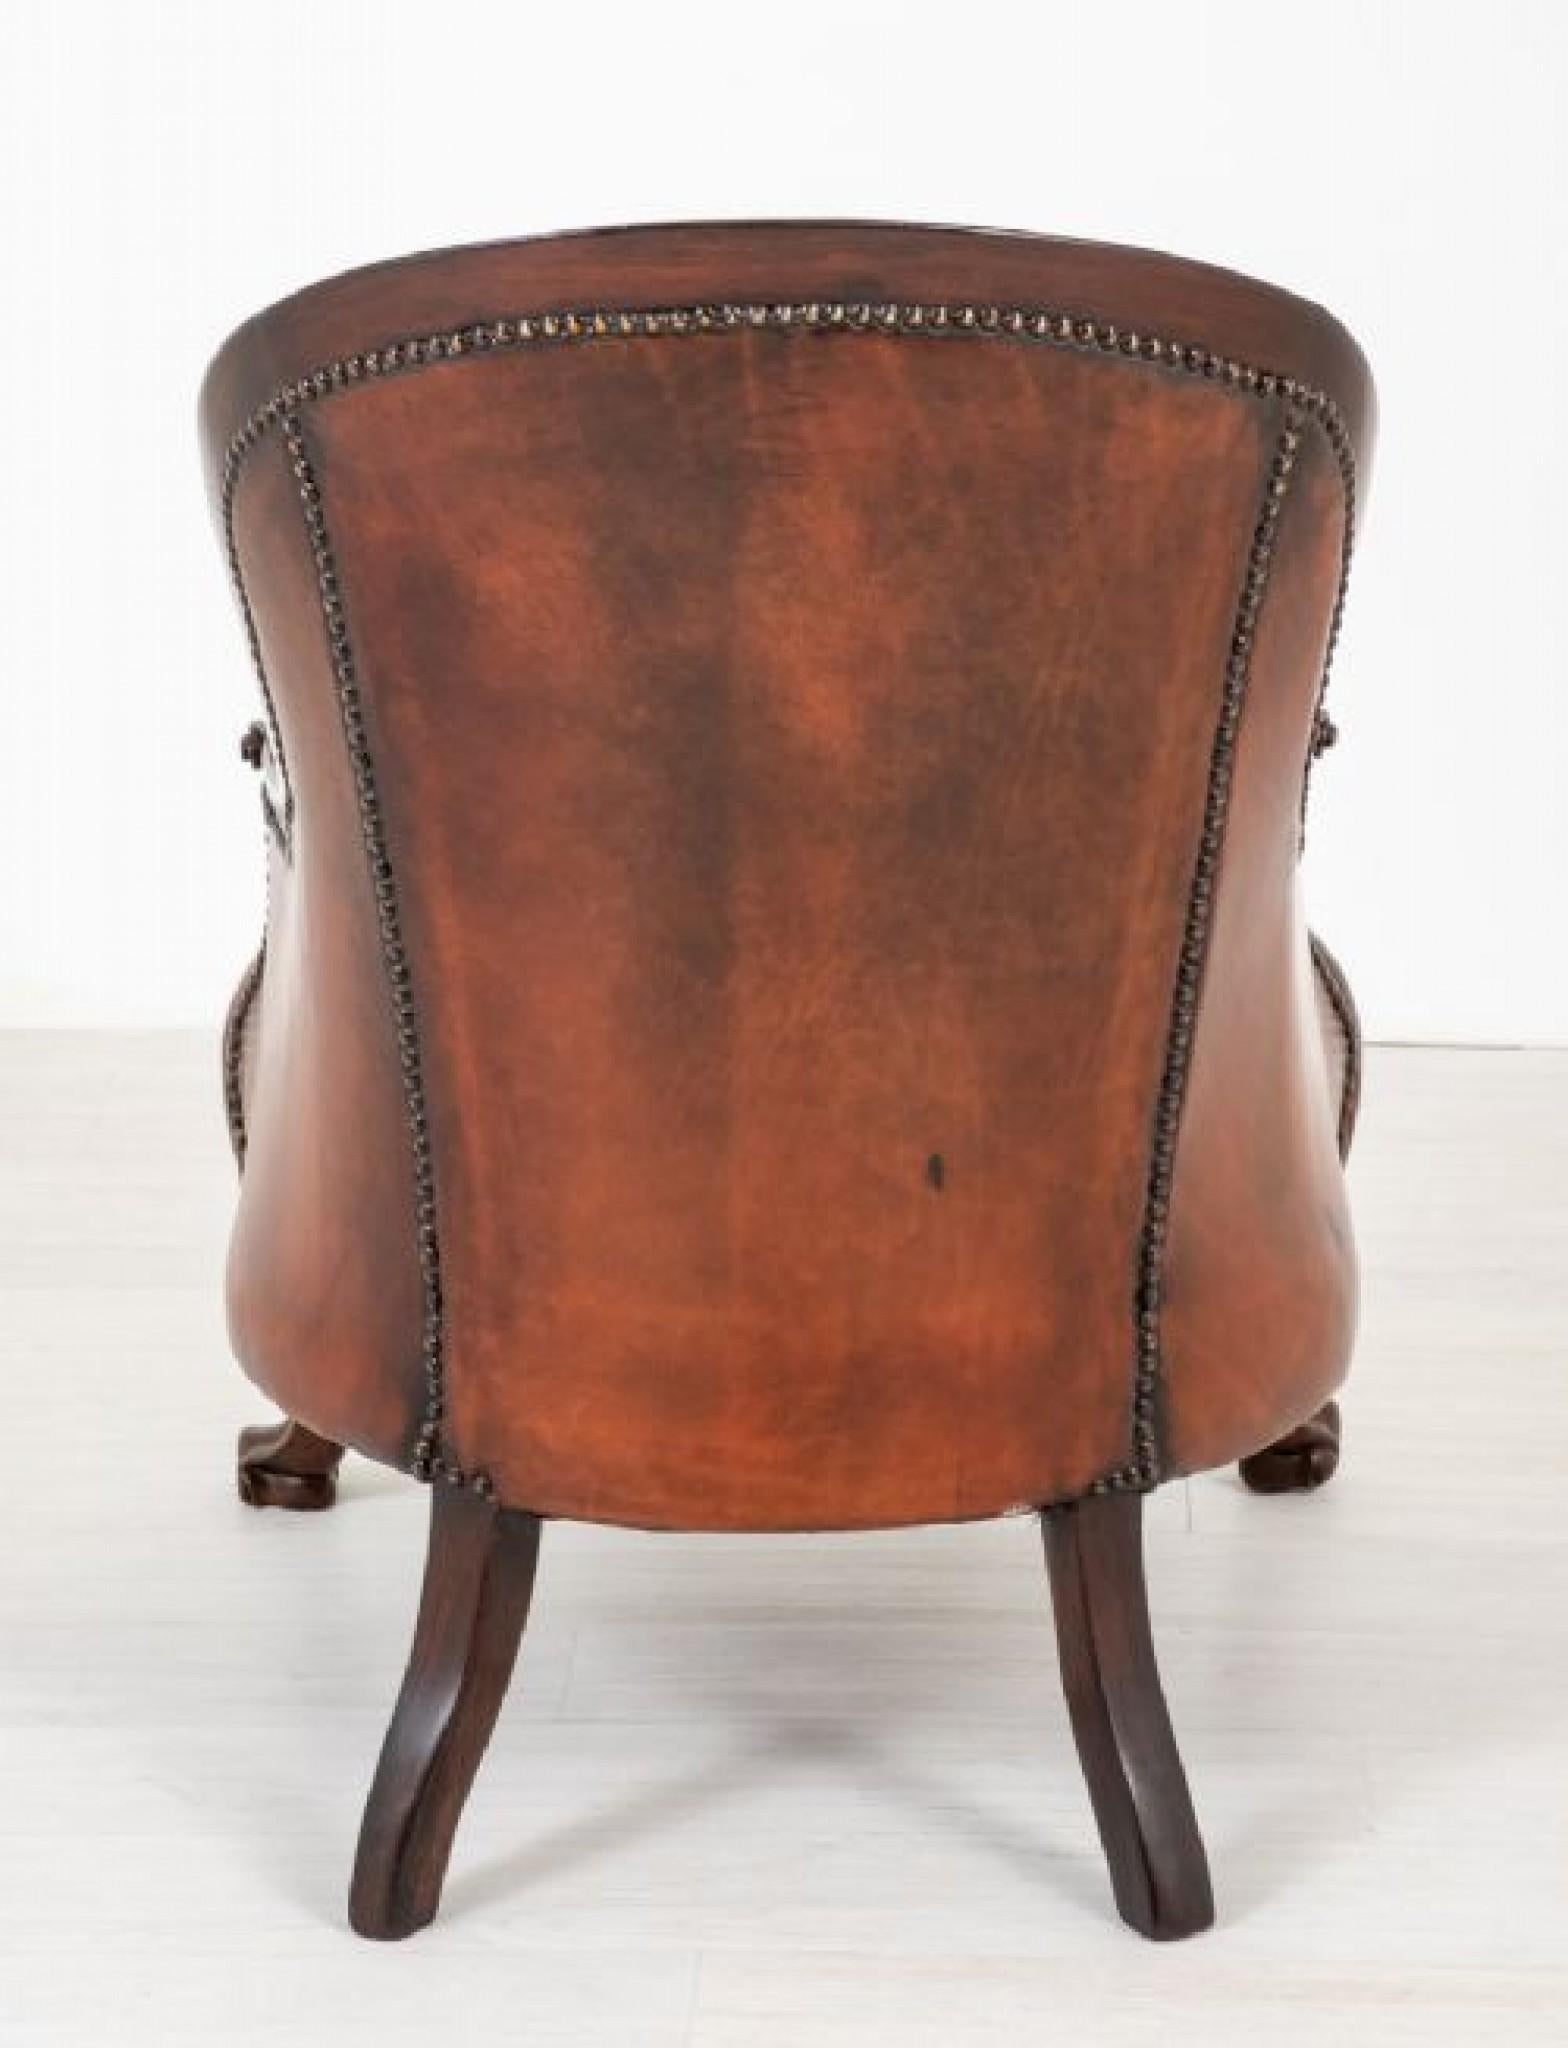 Victorian Rosewood Cabriole Leg armchair.
circa 1860
Standing Upon Cabriole Front legs with Carved Toes.
Having Shaped a Front Rail with Carvings and a Wood Show Frame again with Carvings.
The Chair Has Recently been Reupholstered in a Tobacco